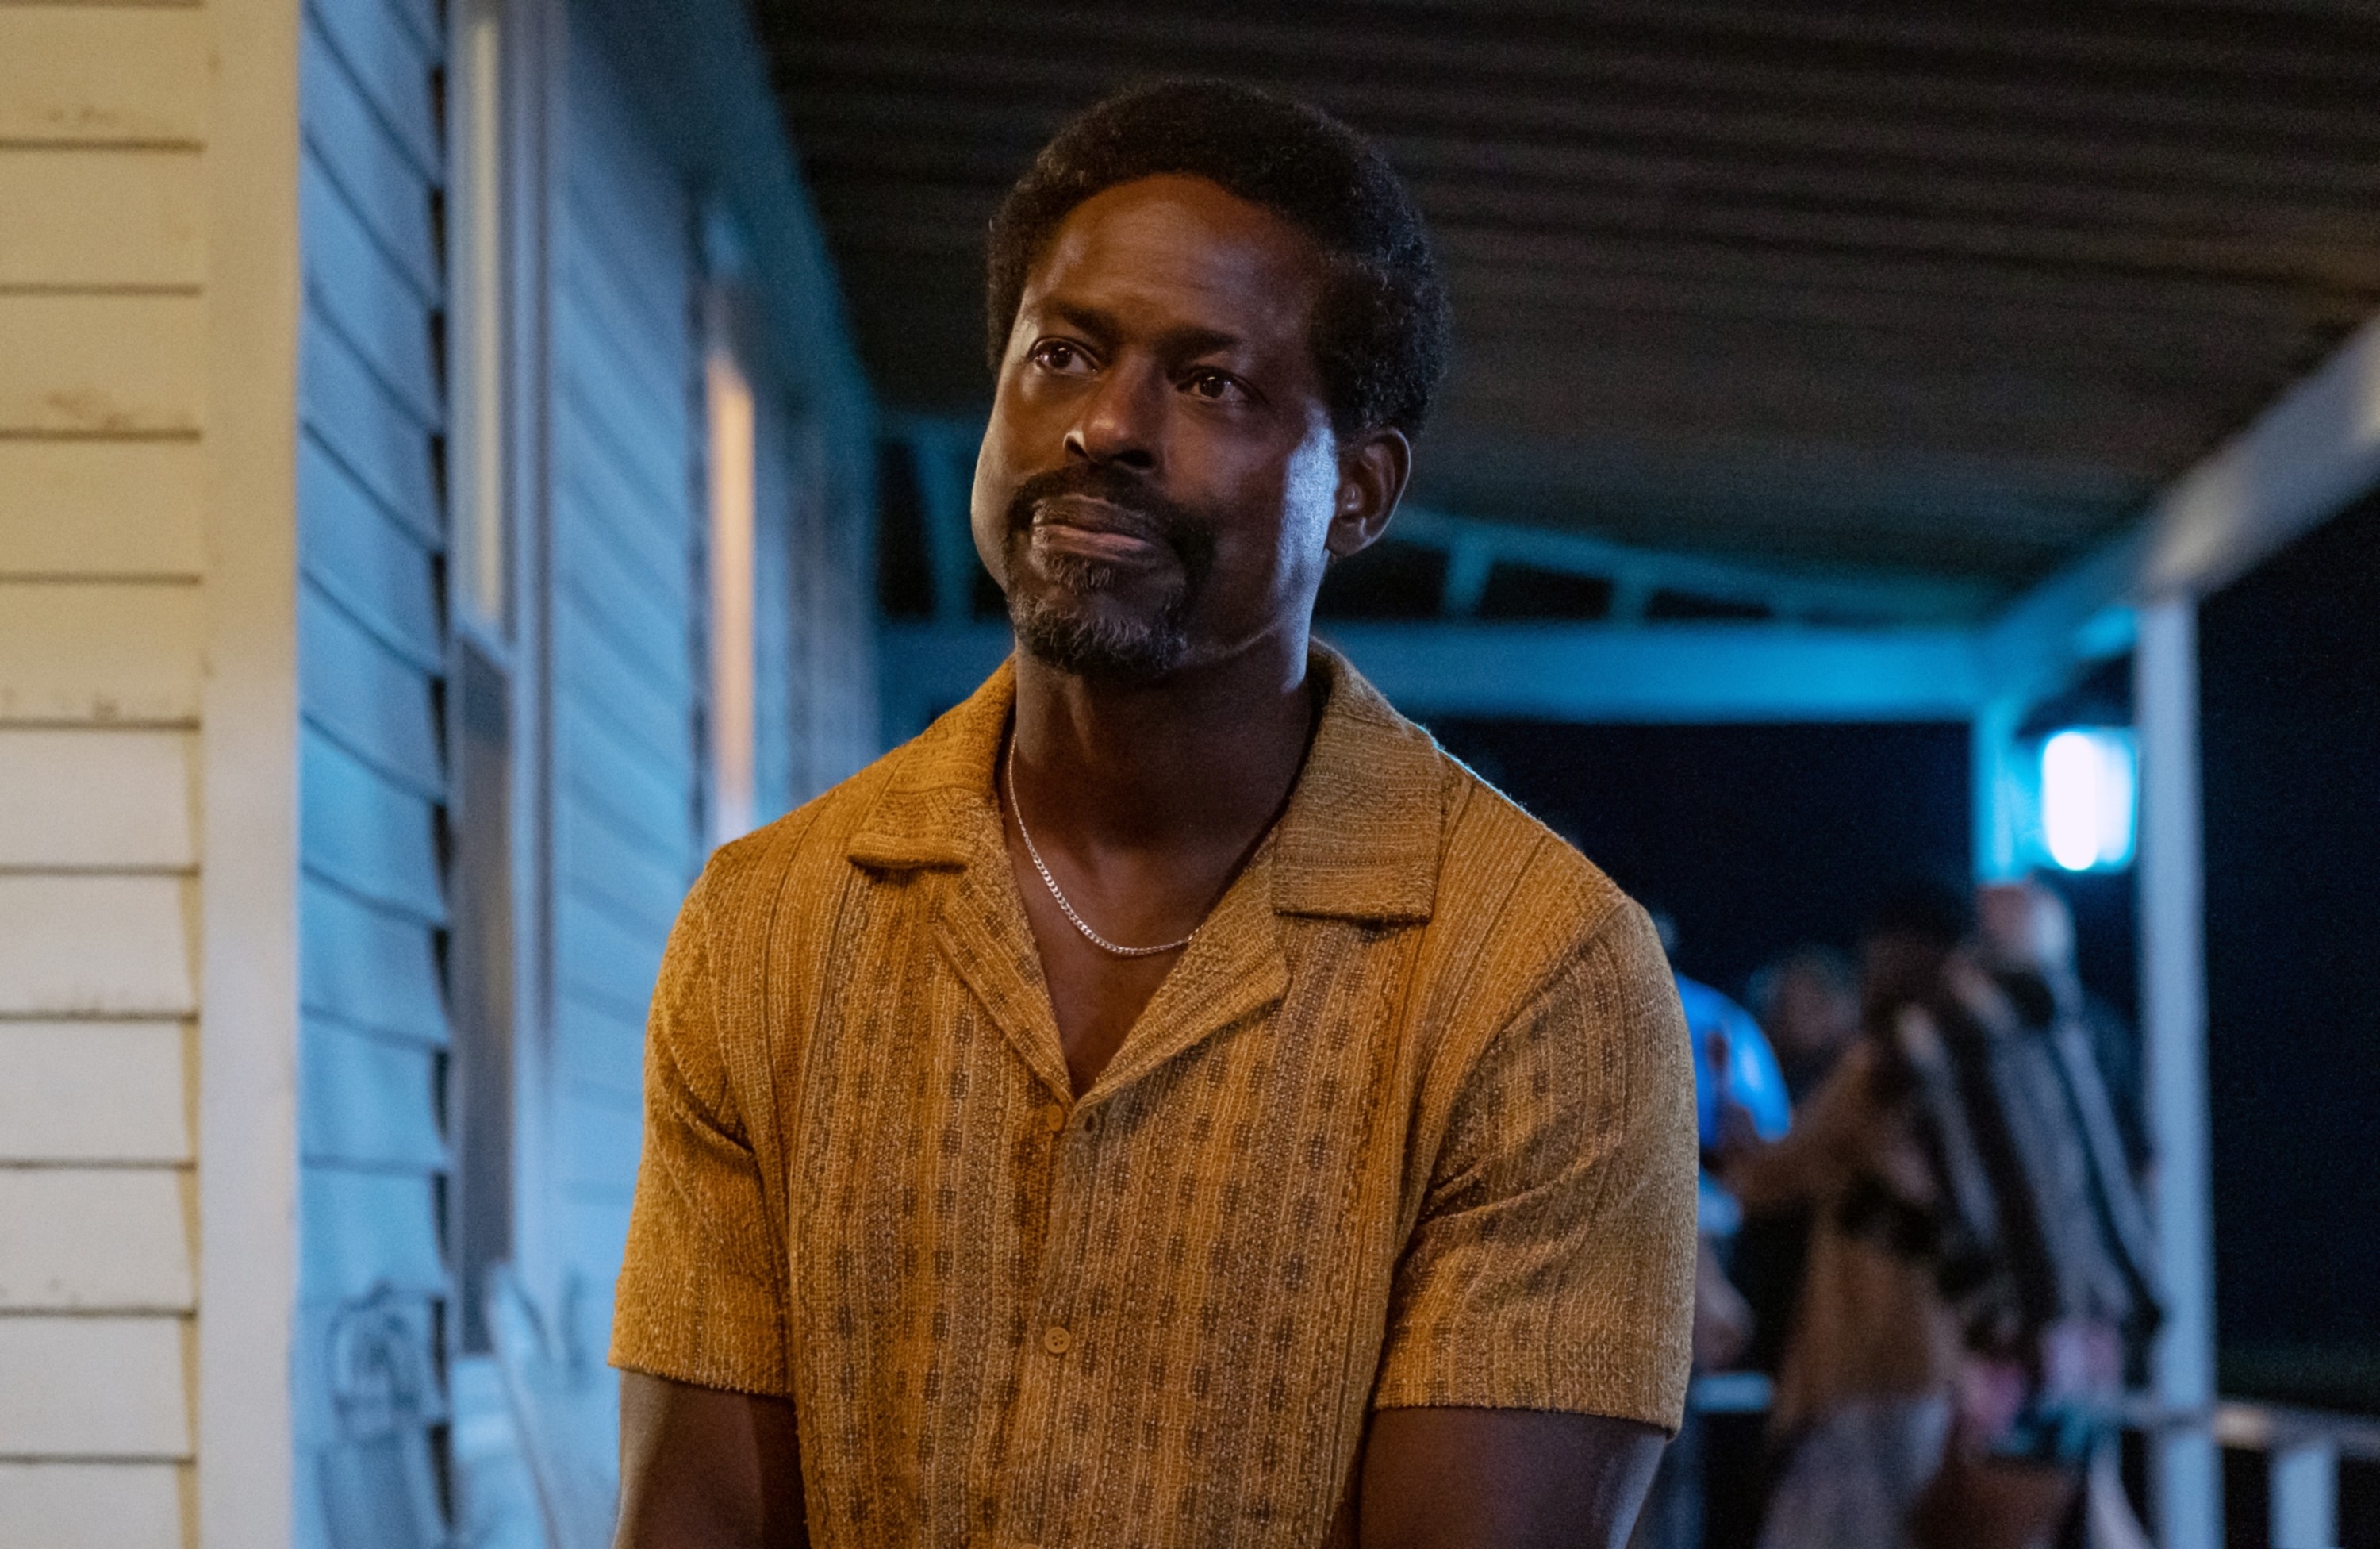 Sterling K Brown in a patterned shirt portraying a character in a TV show scene